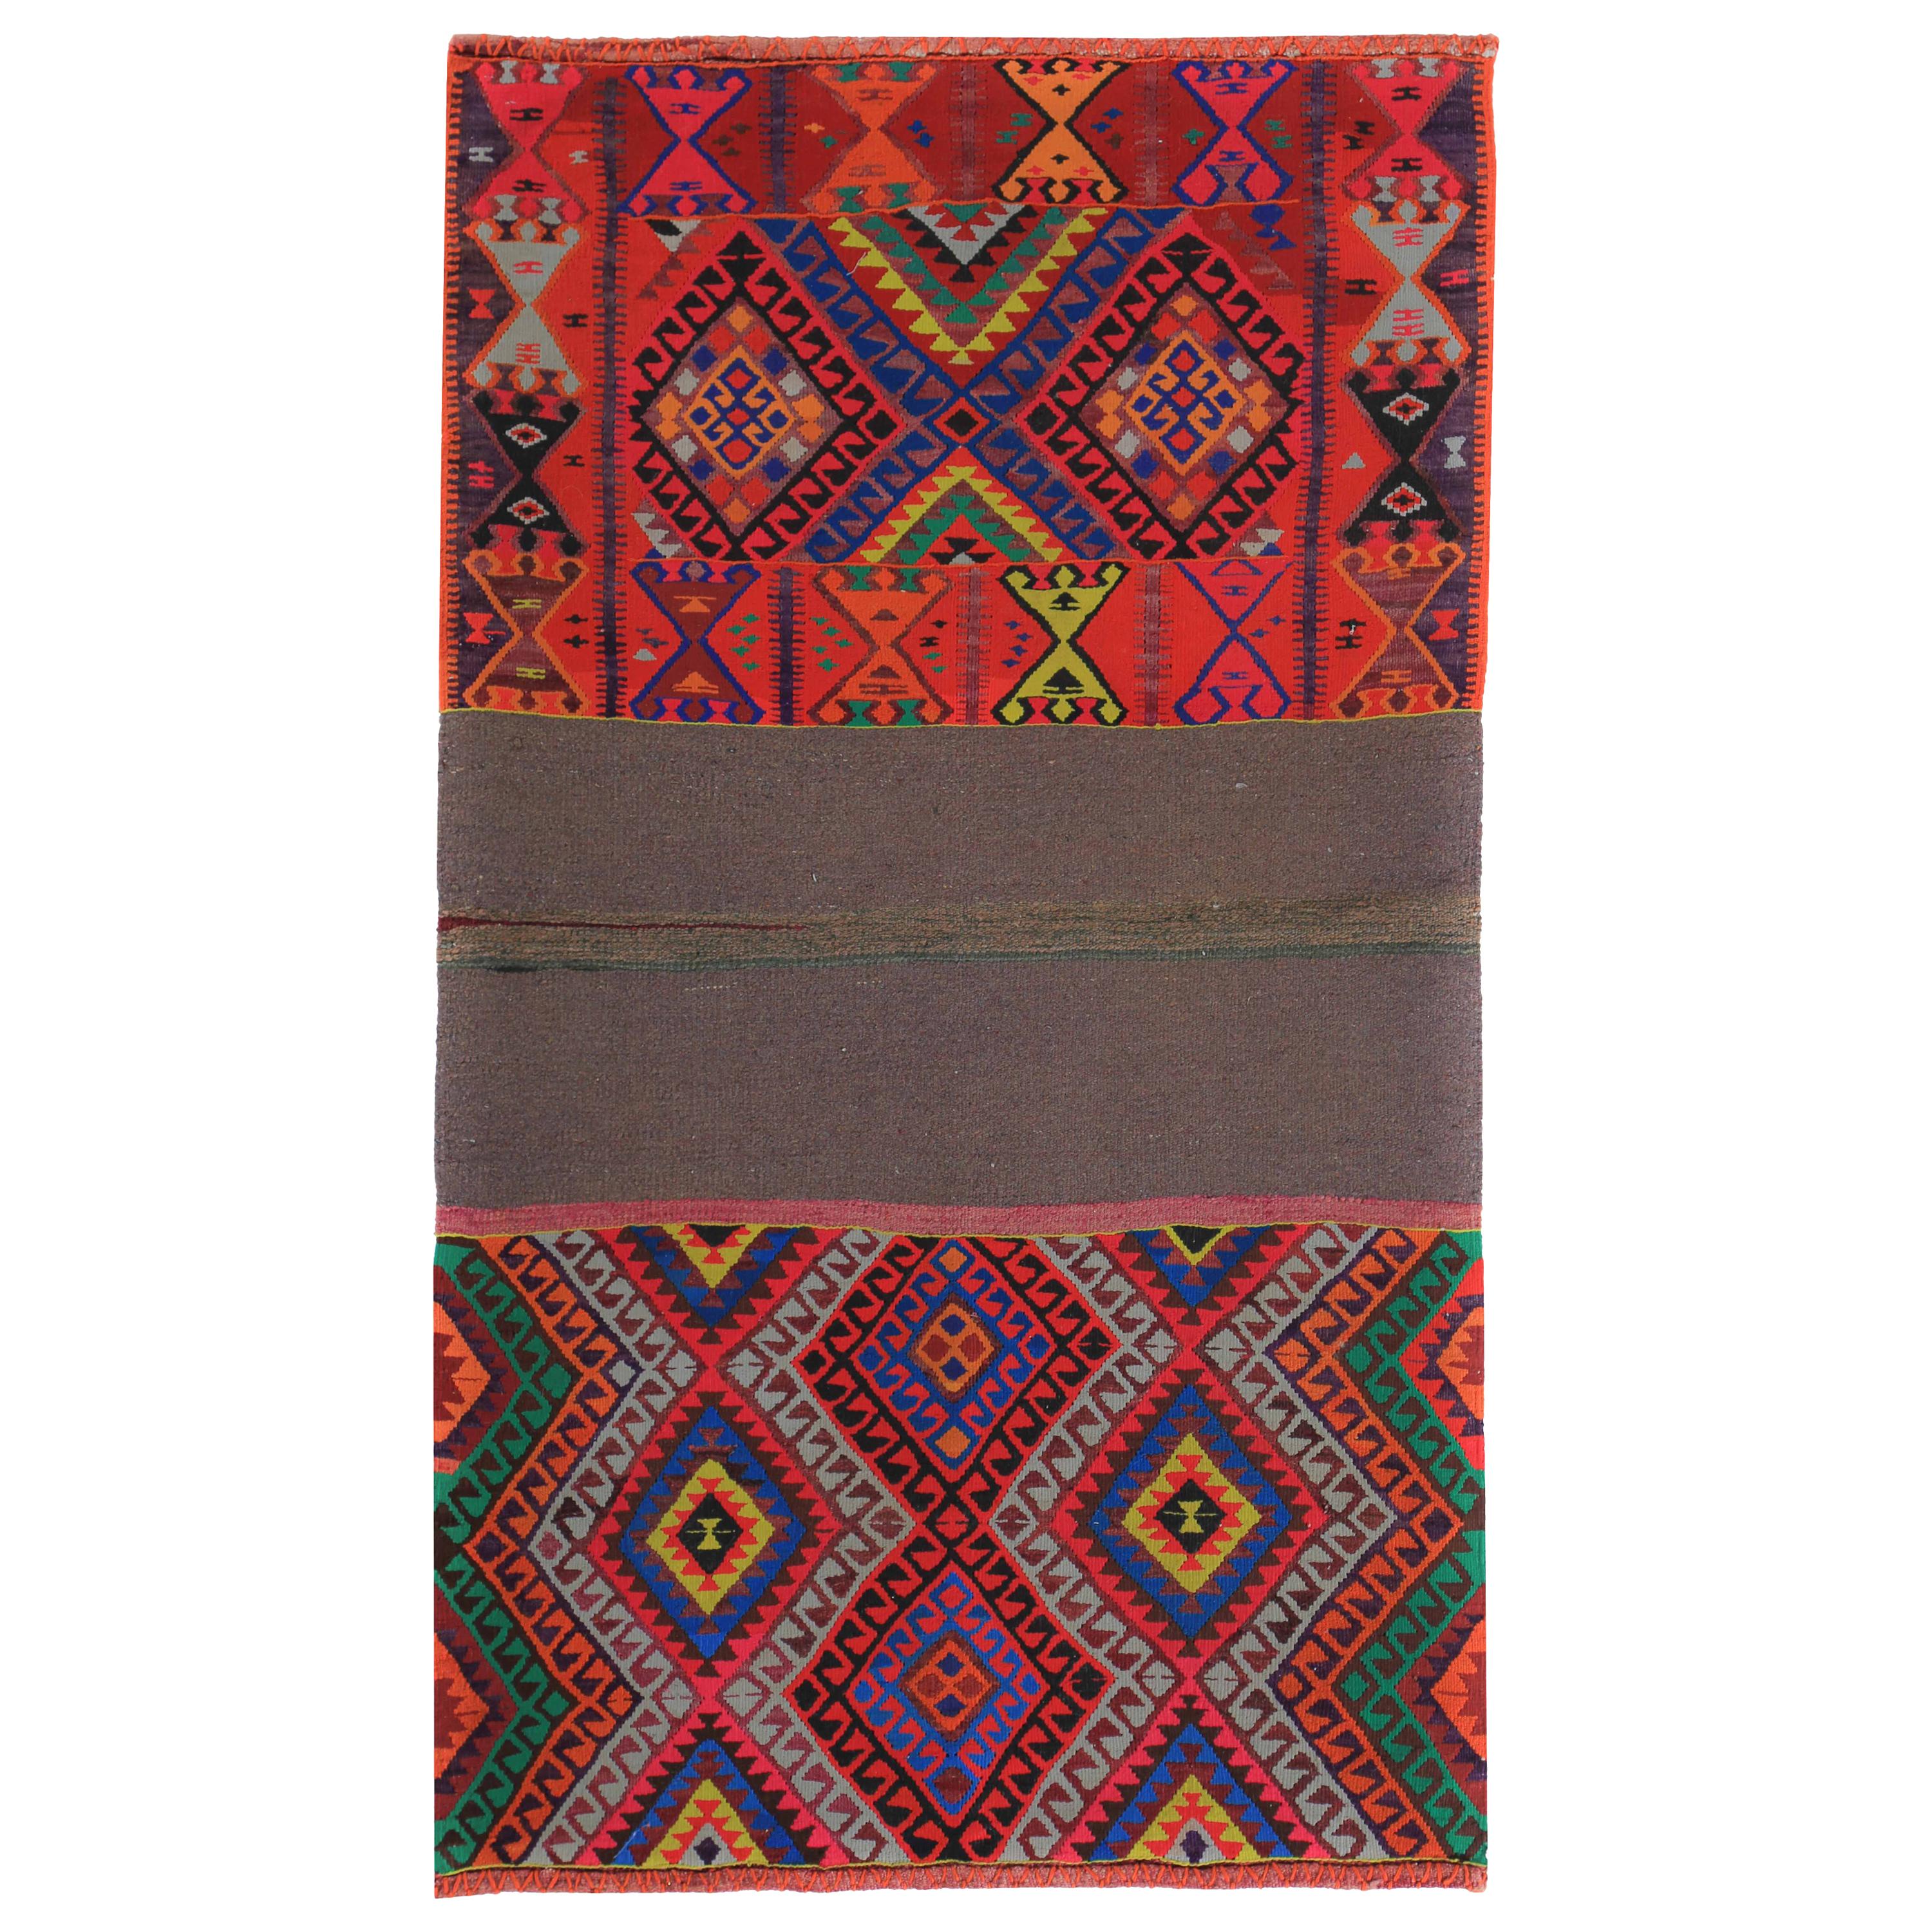 Modern Turkish Kilim Rug with Bright Colored Diamond Details For Sale